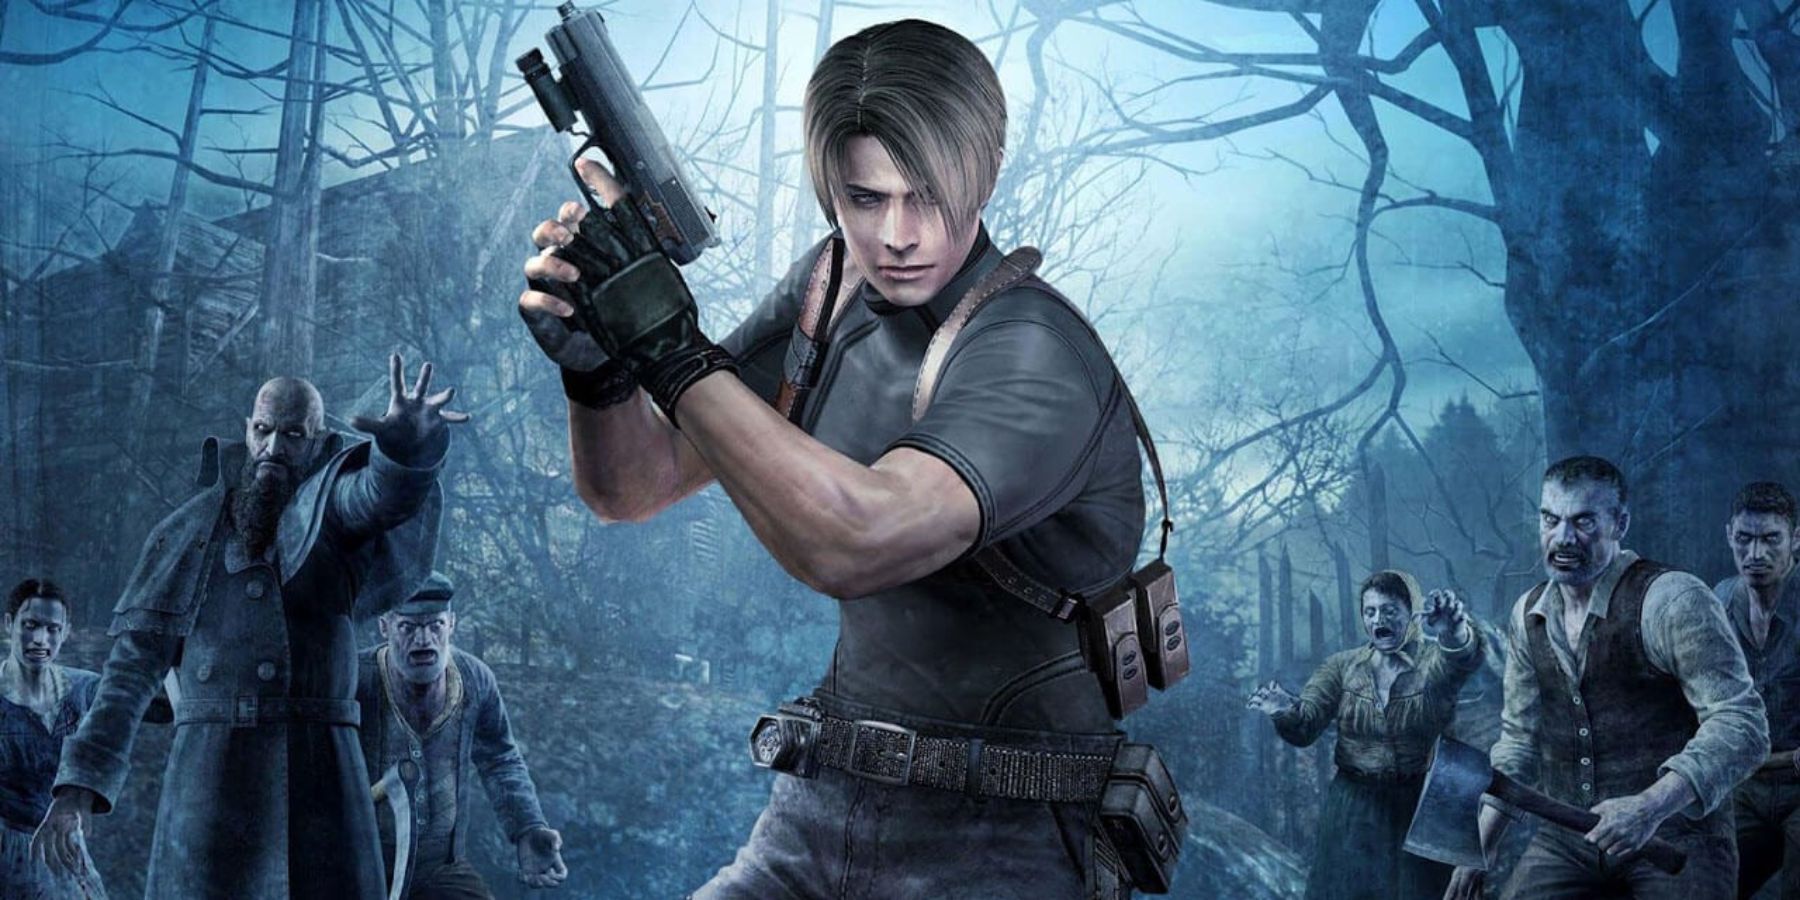 Resident Evil Continues to Shoulder the Weight of a Genre Trendsetter